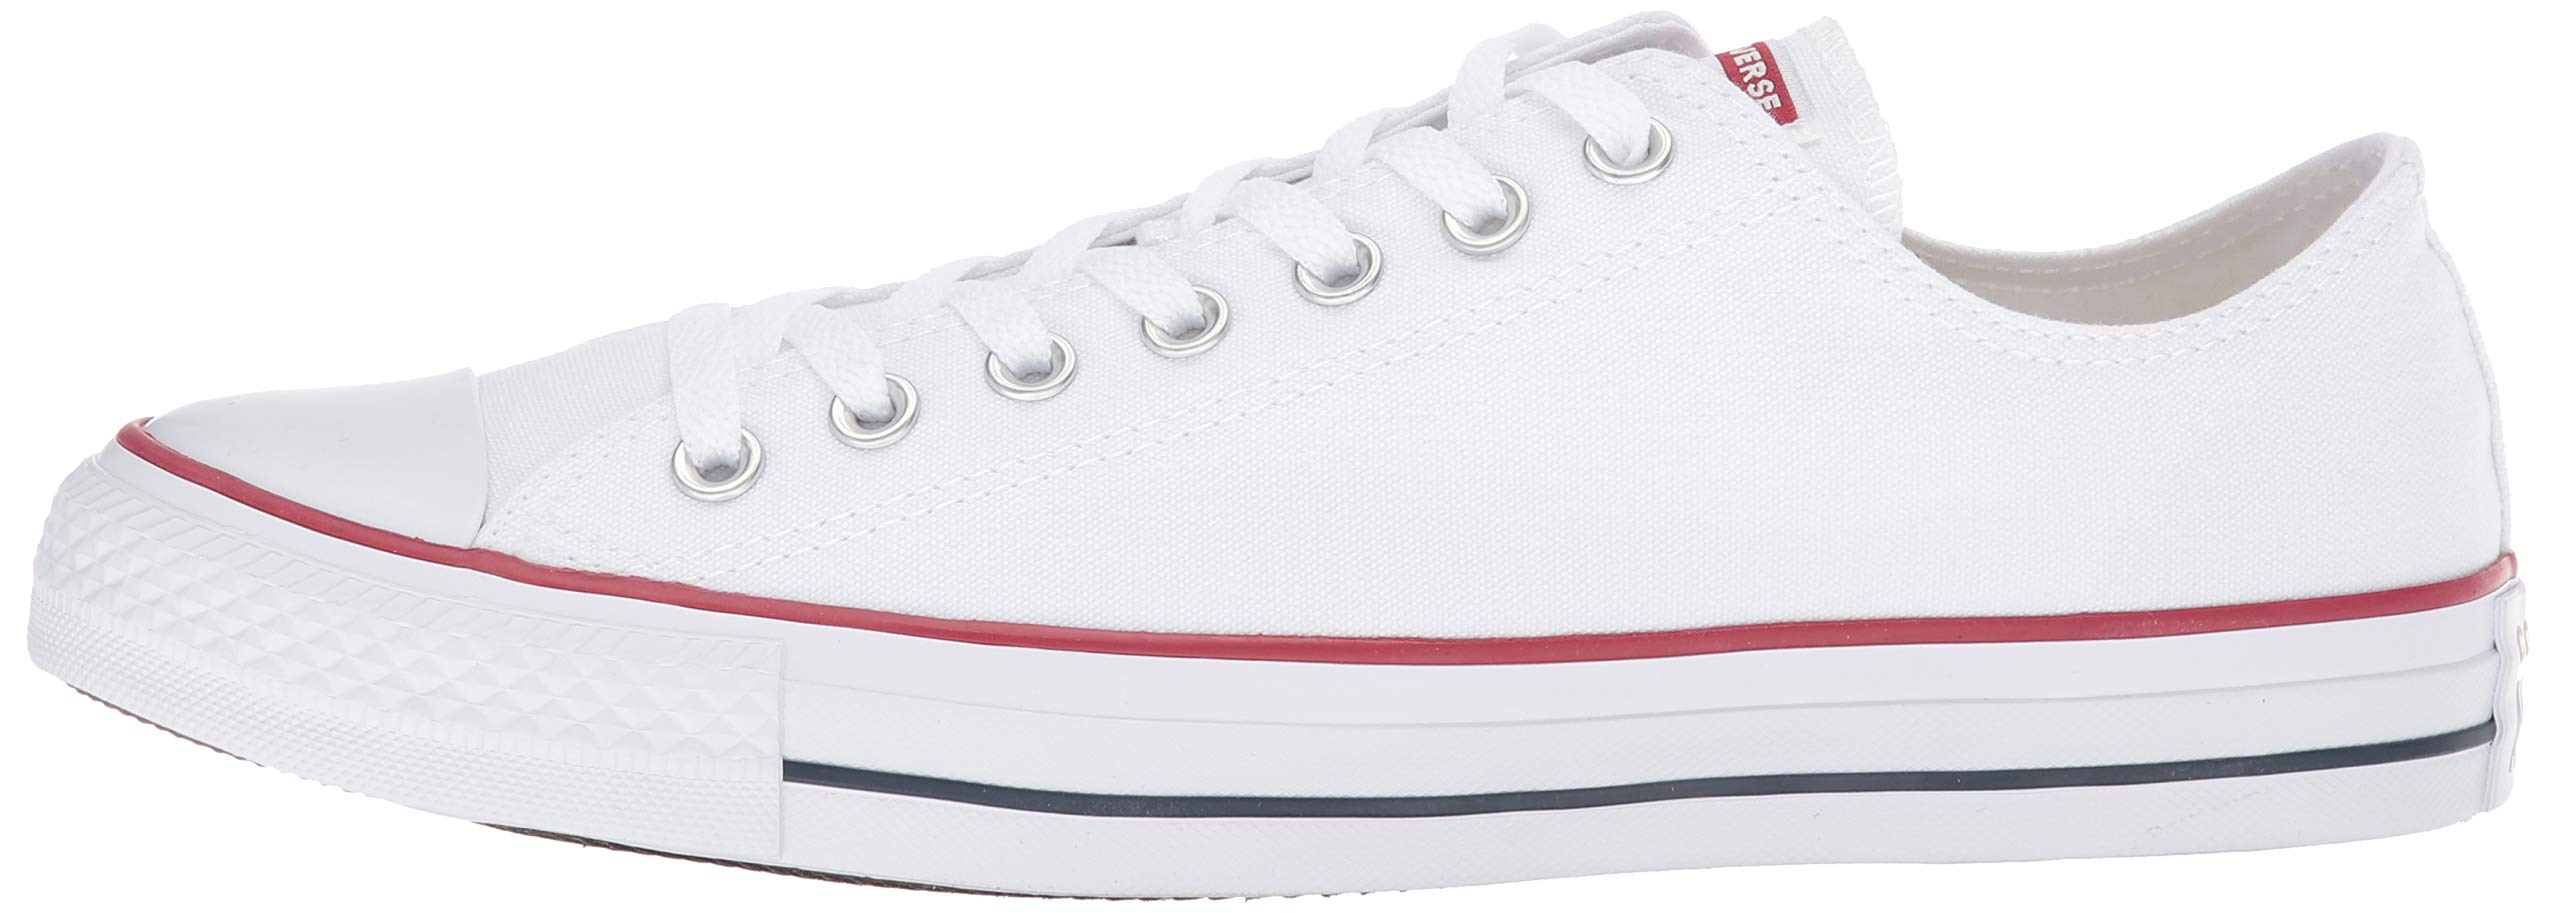 Converse Chuck Taylor All Star Low Top Optical White, US Men's